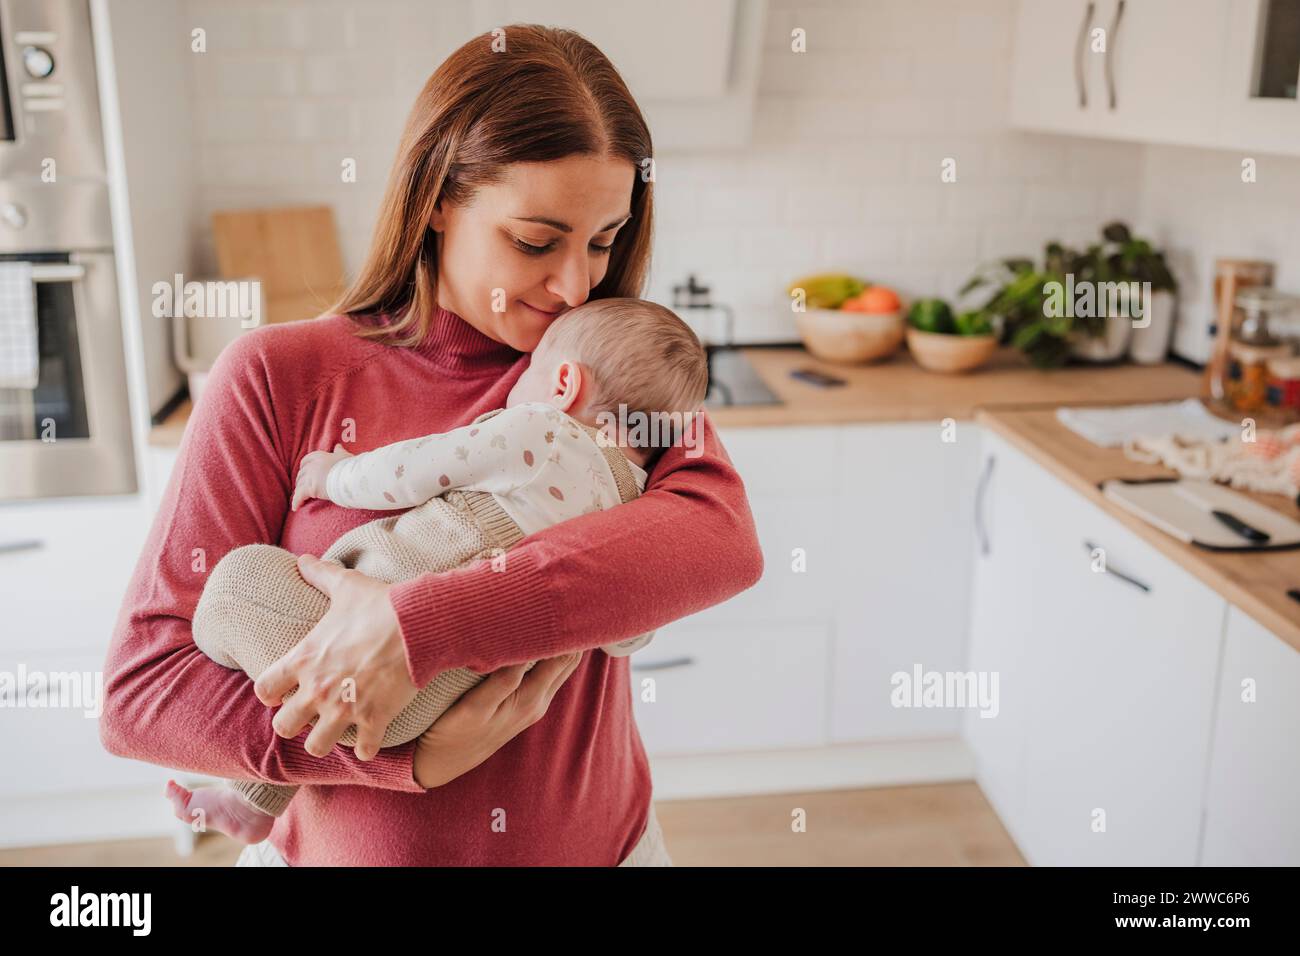 Smiling woman embracing baby daughter in kitchen at home Stock Photo